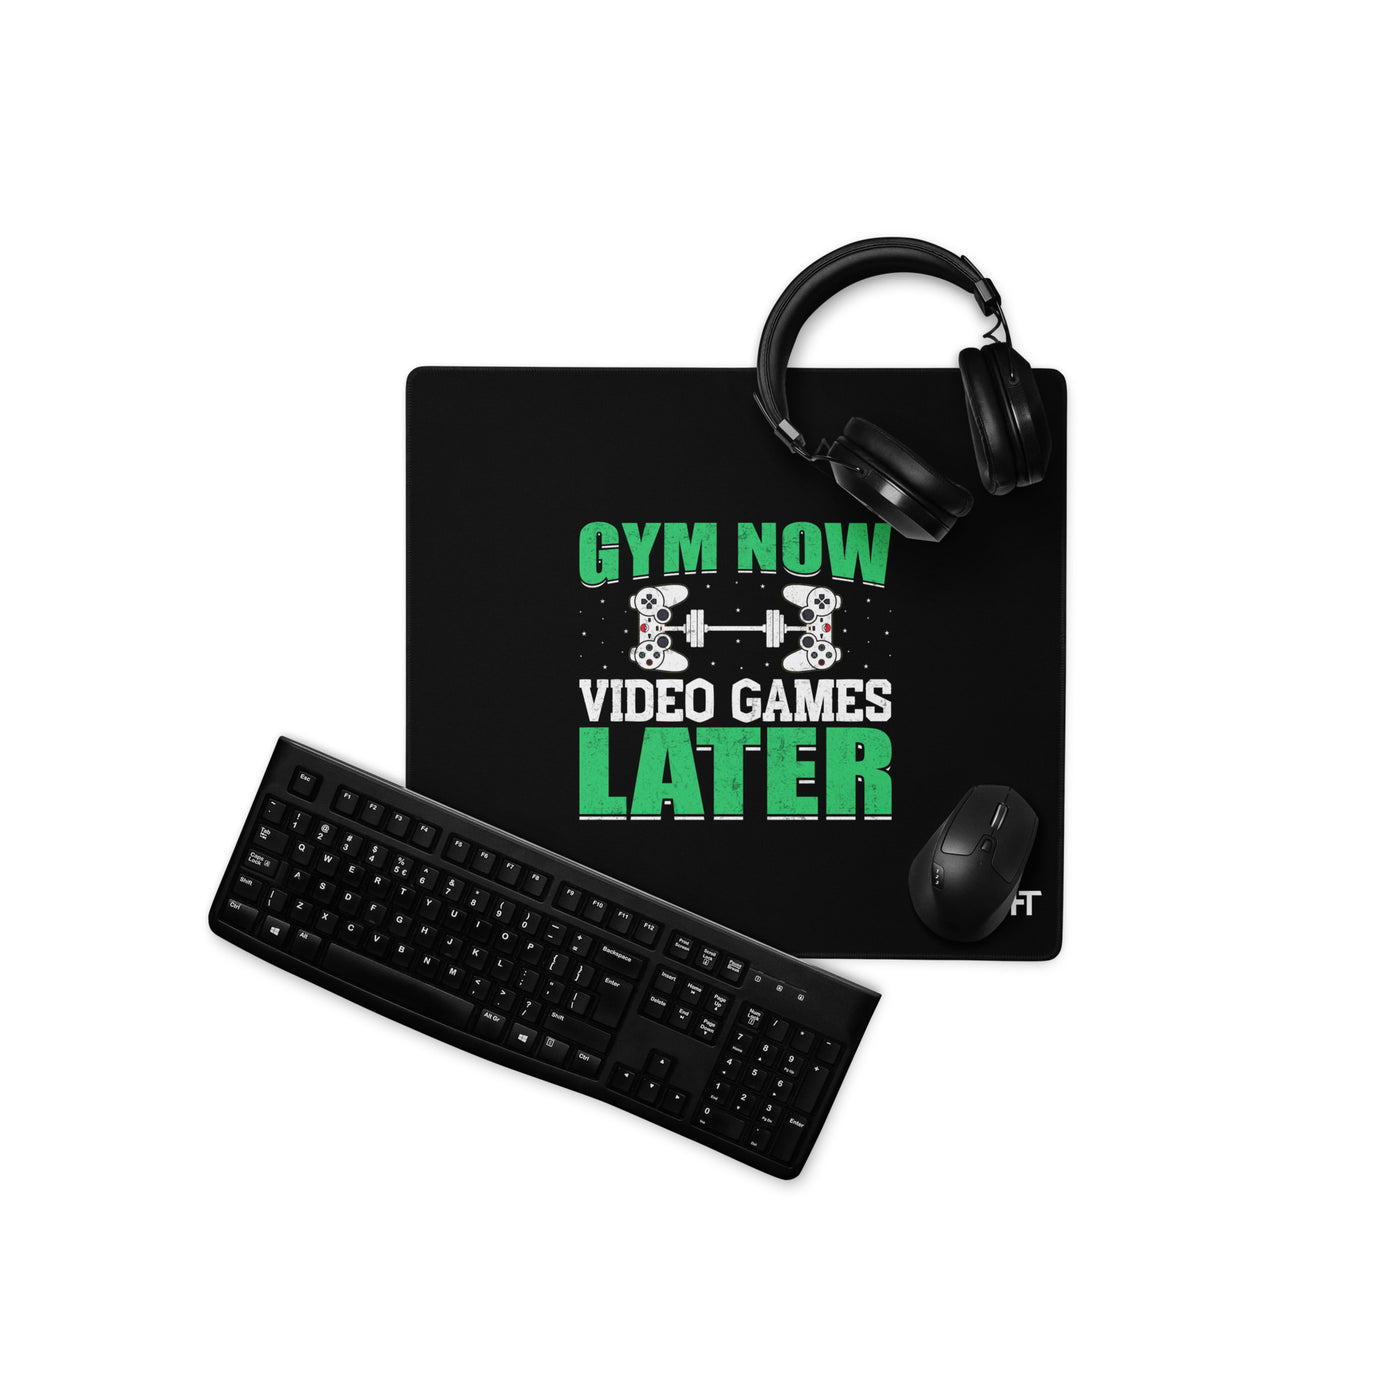 Gym now, Video Games Later - Desk Mat